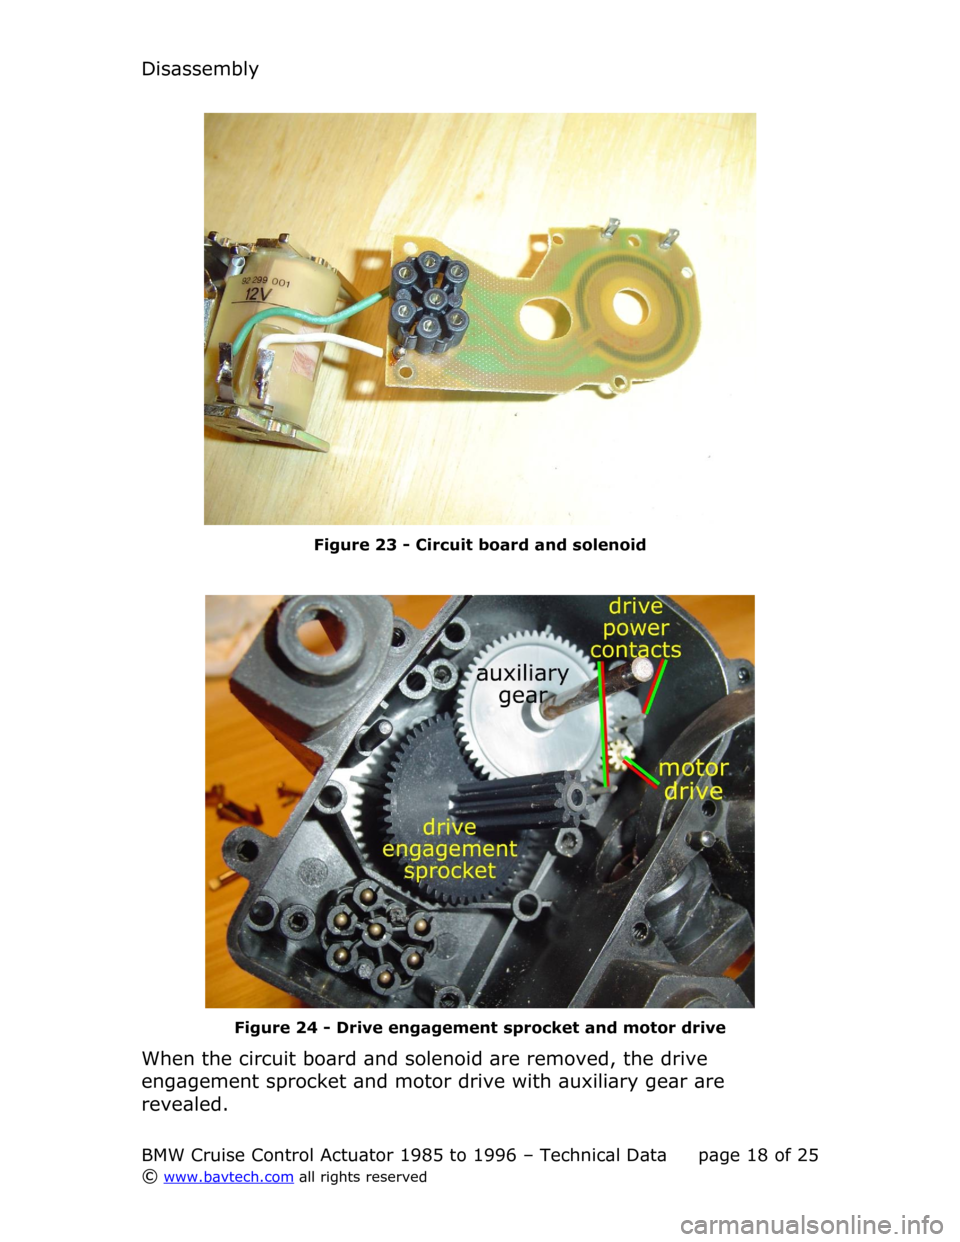 BMW 5 SERIES 1993 E34 Cruise Control Acutator Disassembly
Figure  23  - Circuit board and solenoid
Figure  24  - Drive engagement sprocket and motor drive
When the circuit board and solenoid are removed, the drive  
engagement sprocket and motor 